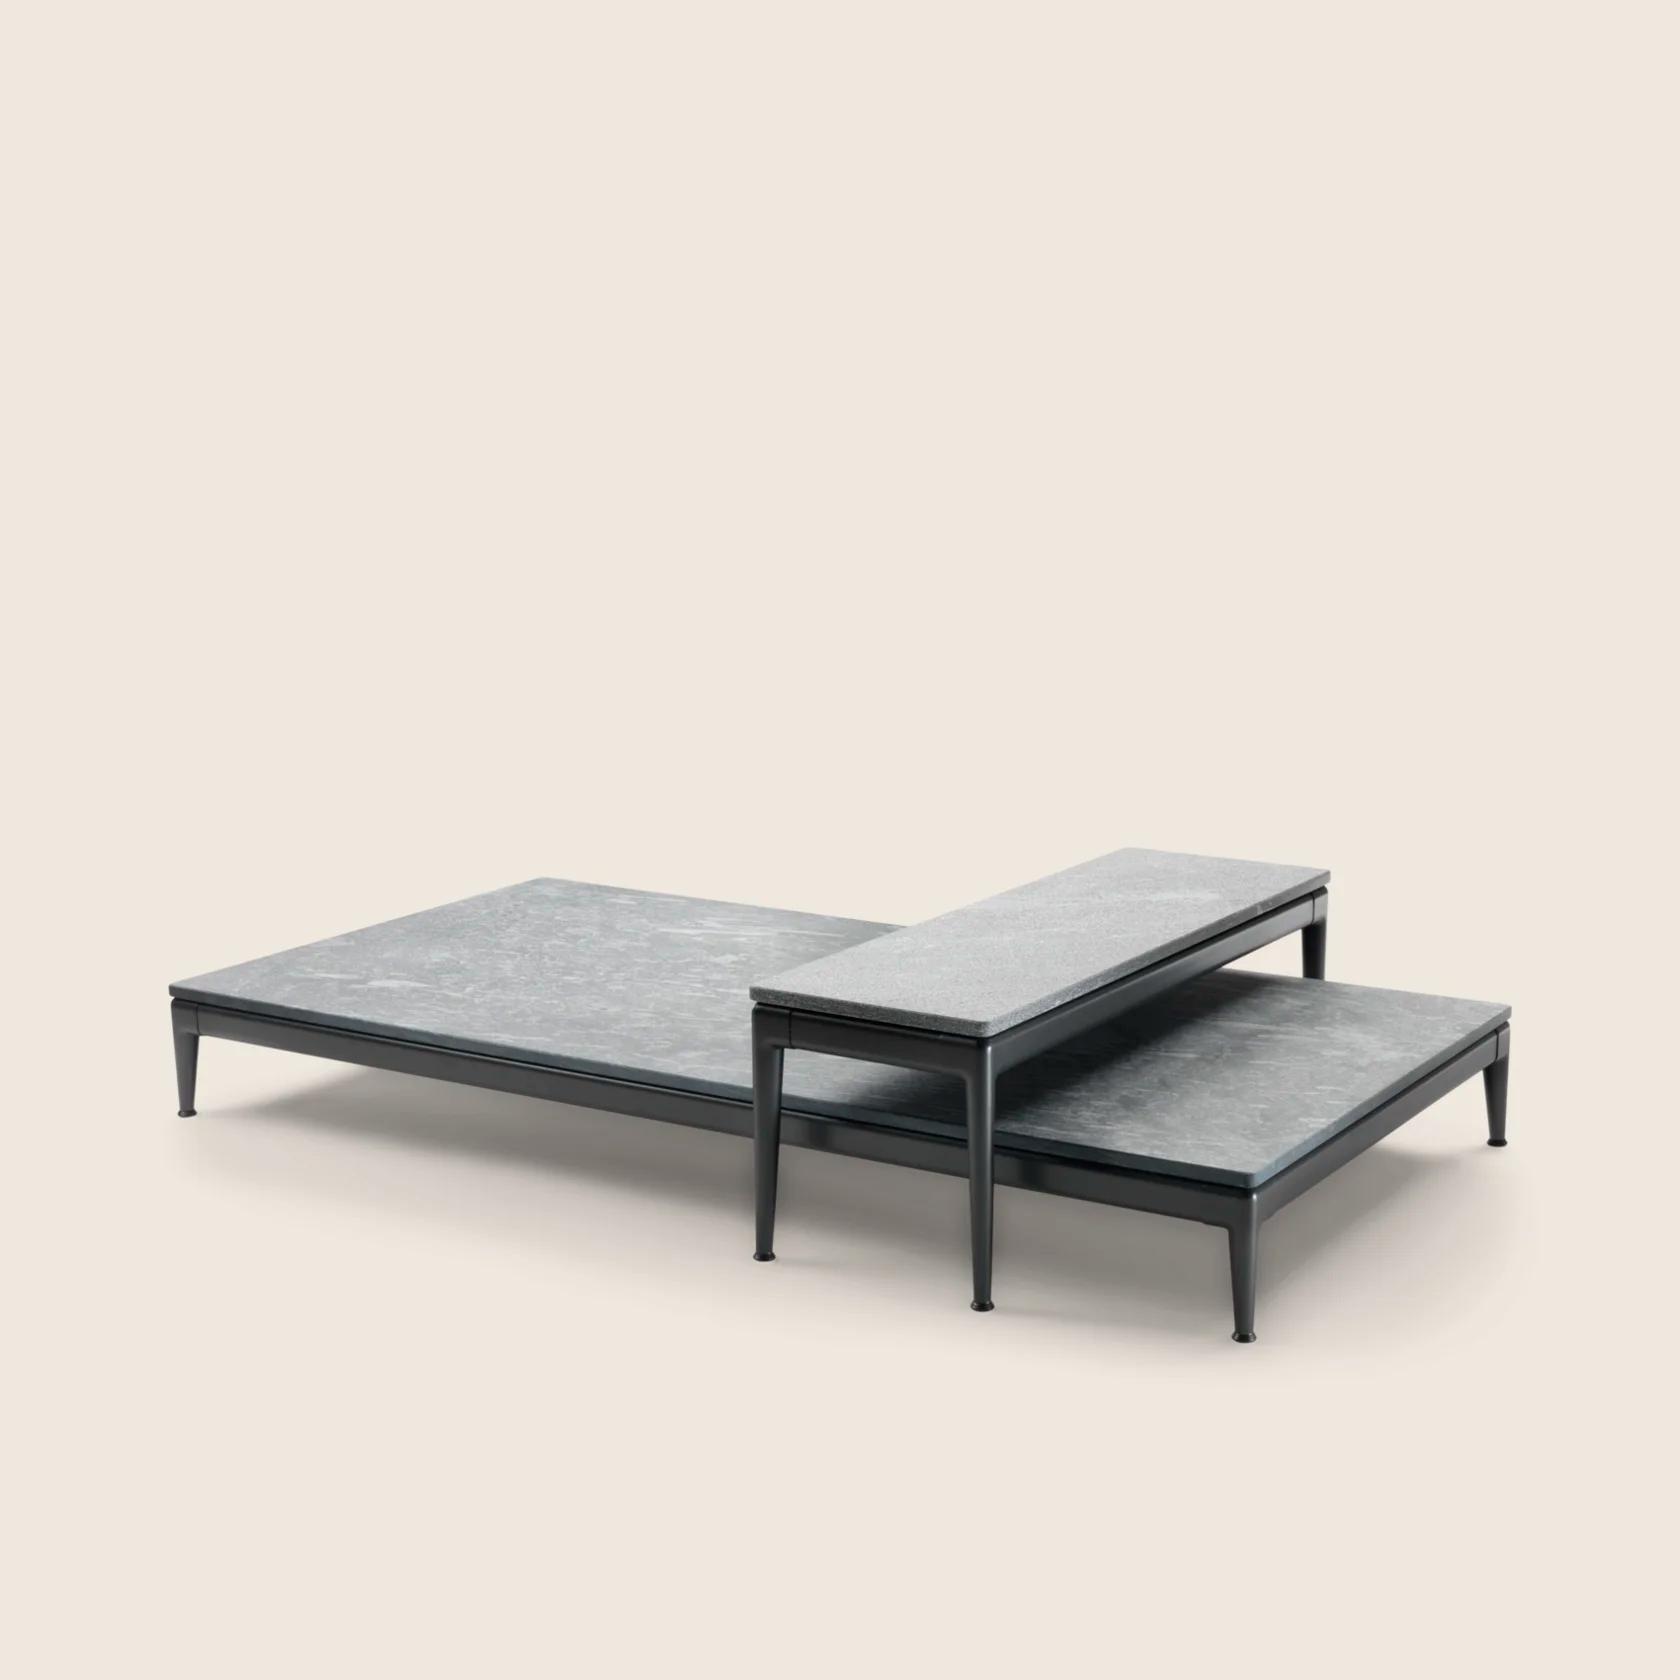 0283H1_PICO OUTDOOR_COFFEETABLE_03.png